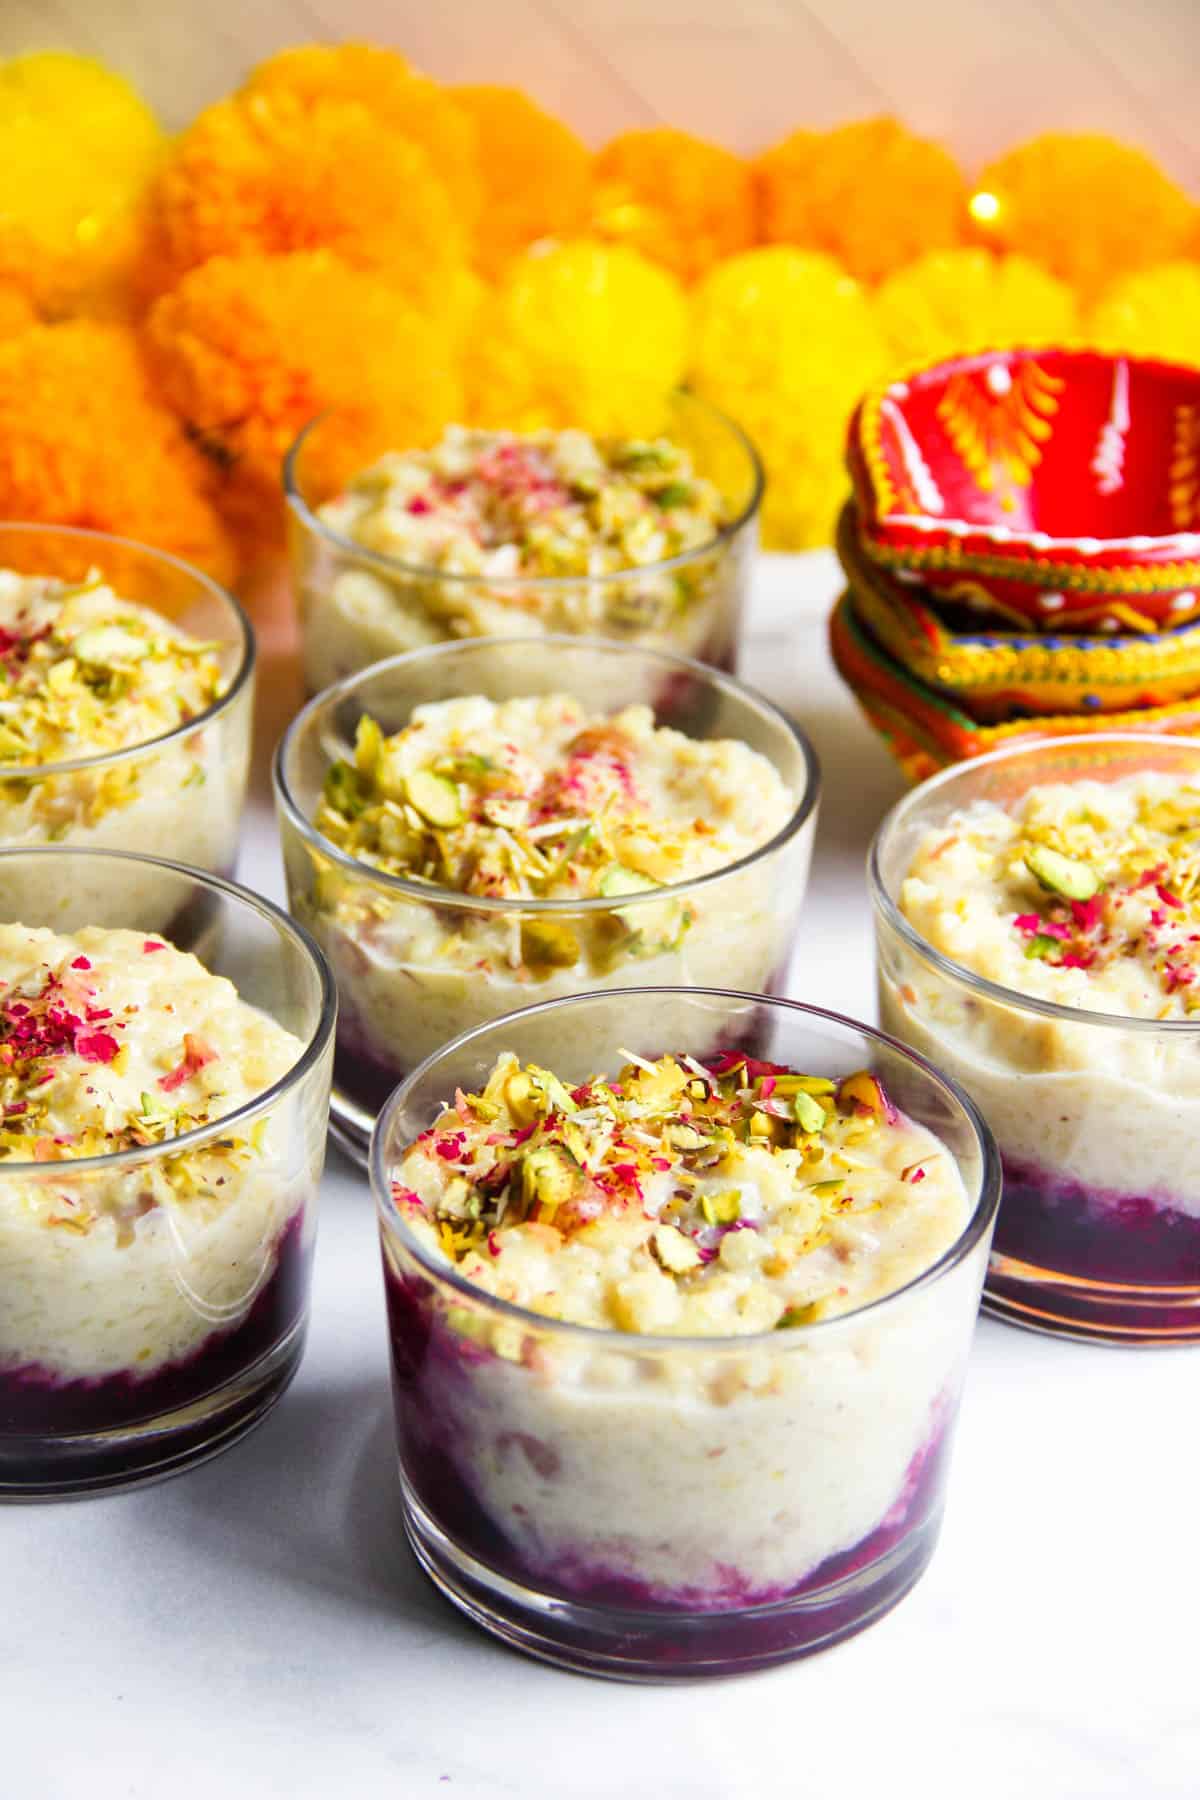 Rice pudding with berry compote garnished with pistachios and rose petals